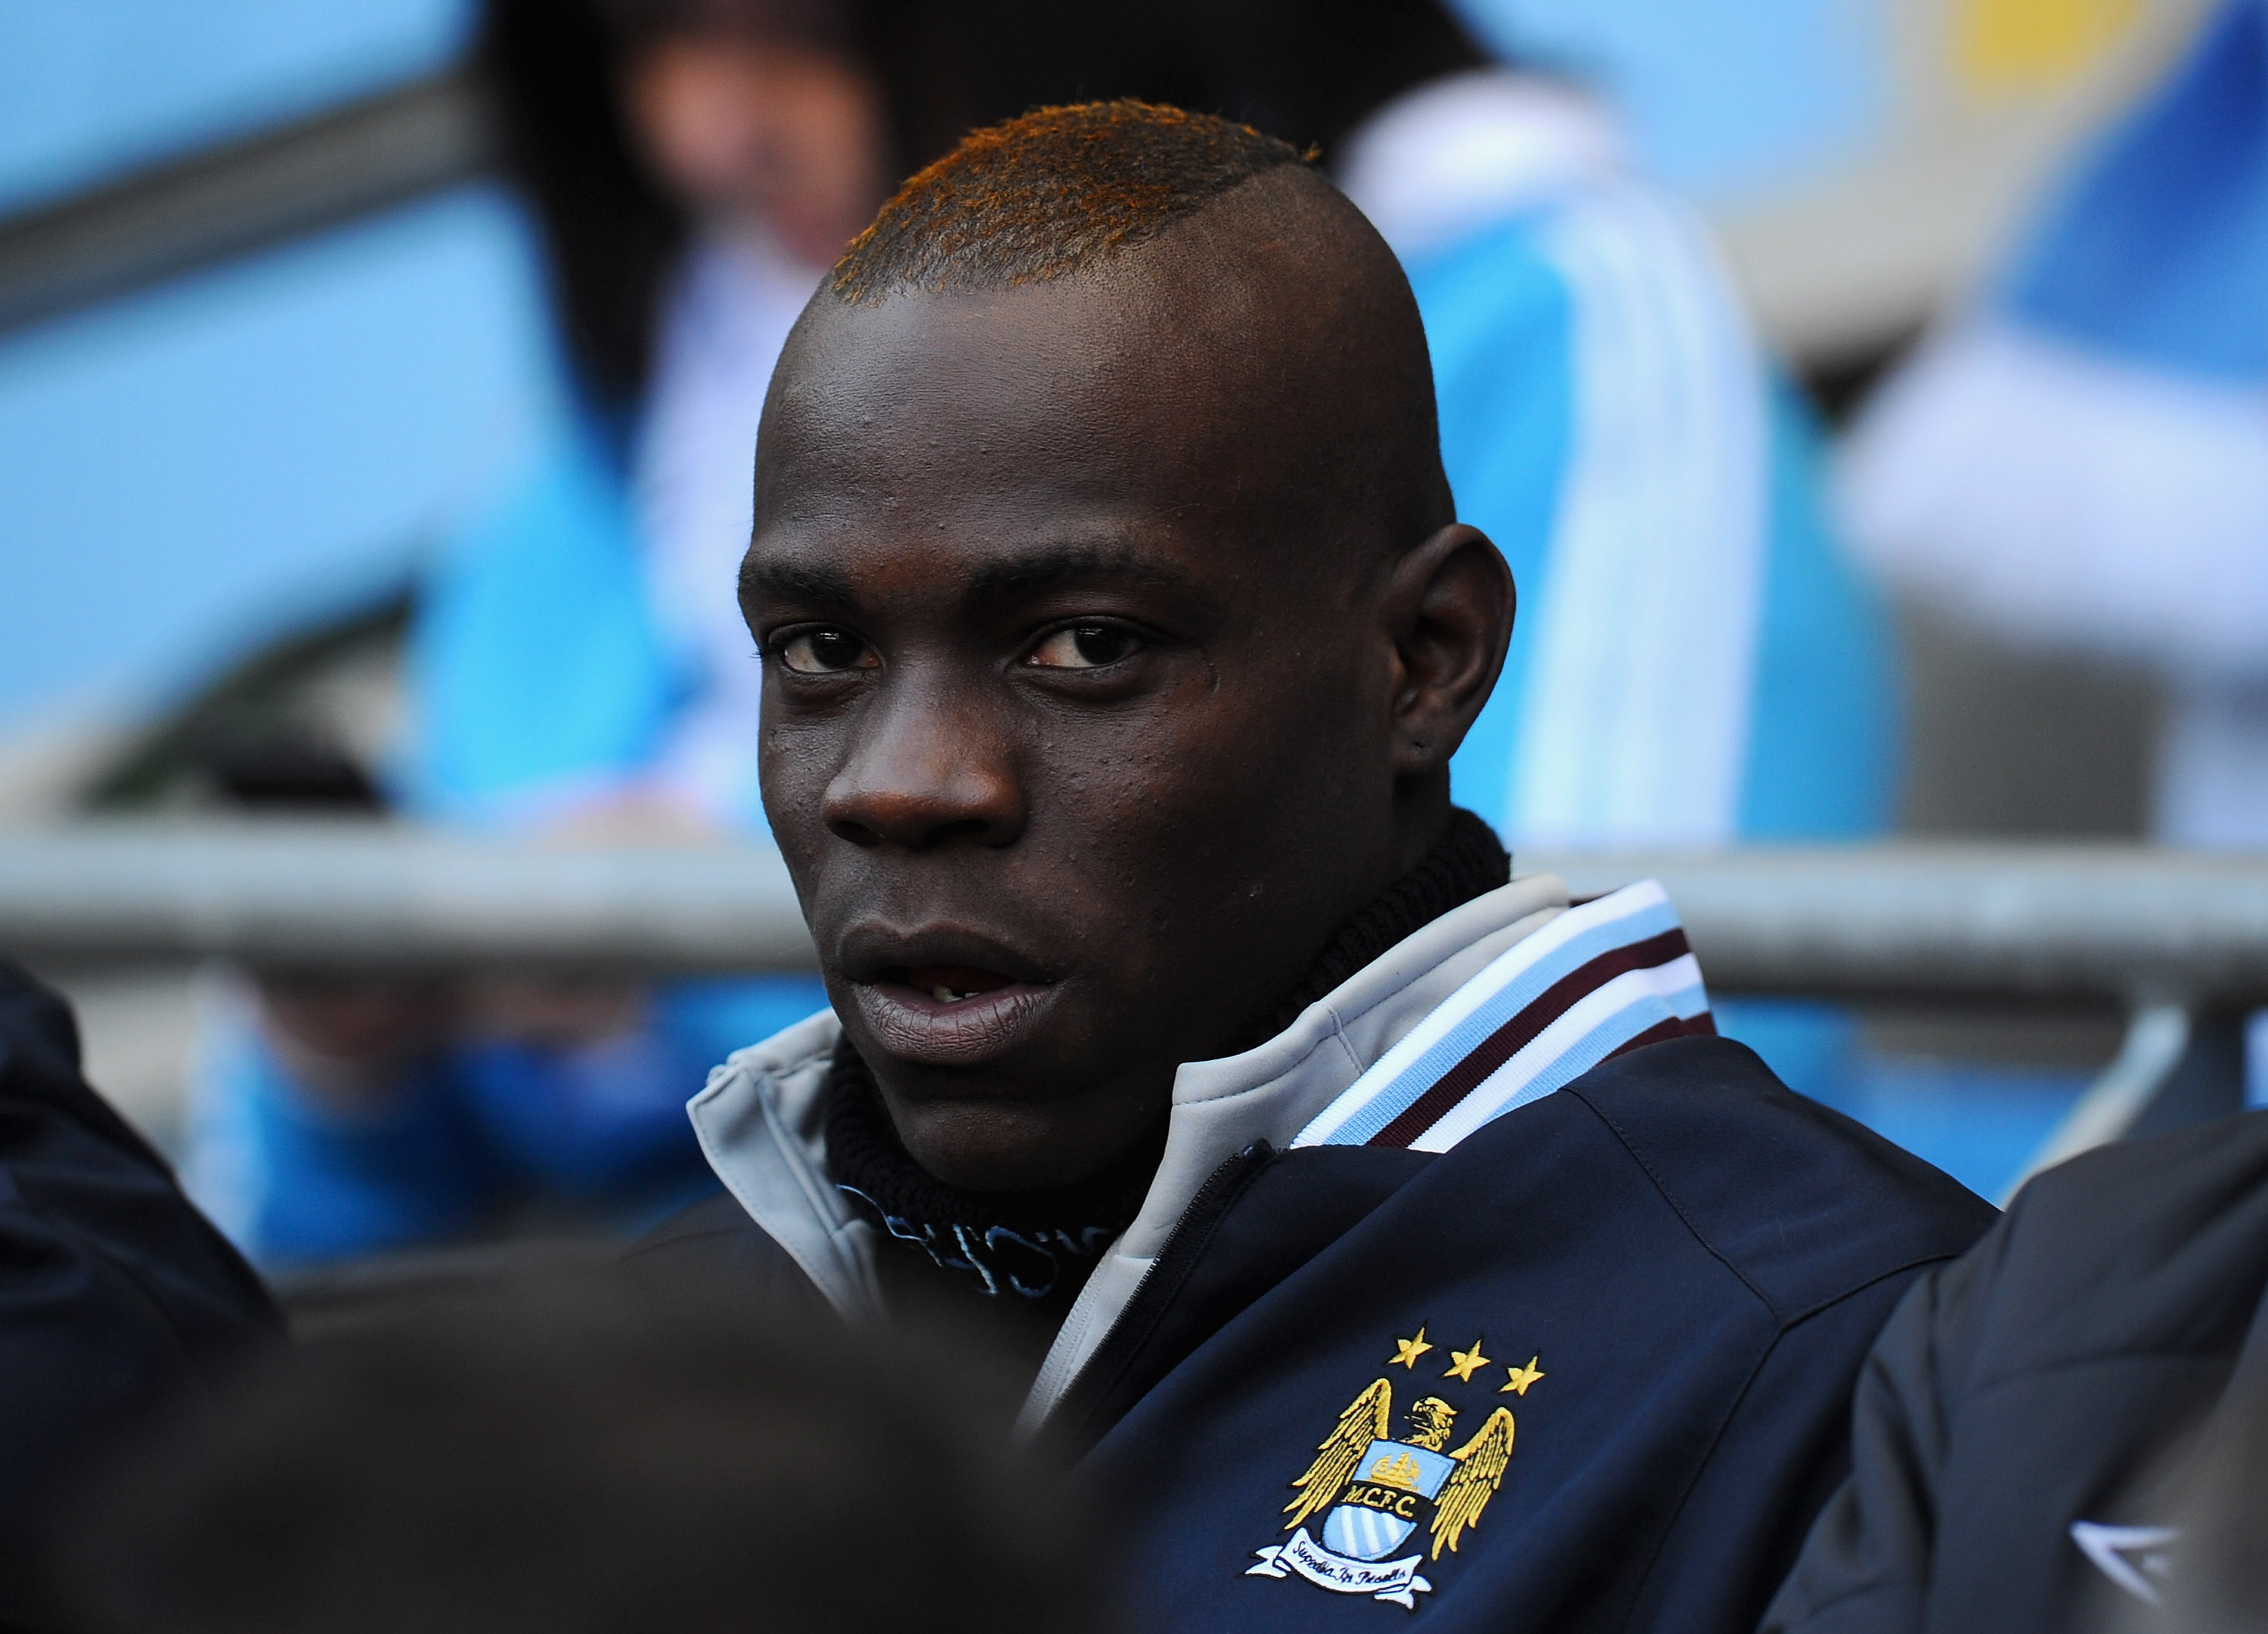 MANCHESTER, ENGLAND - MARCH 13:  Mario Balotelli of Manchester City sits on the bench ahead of the FA Cup sponsored by E.On Sixth Round match between Manchester City and Reading at the City of Manchester Stadium on March 13, 2011 in Manchester, England.